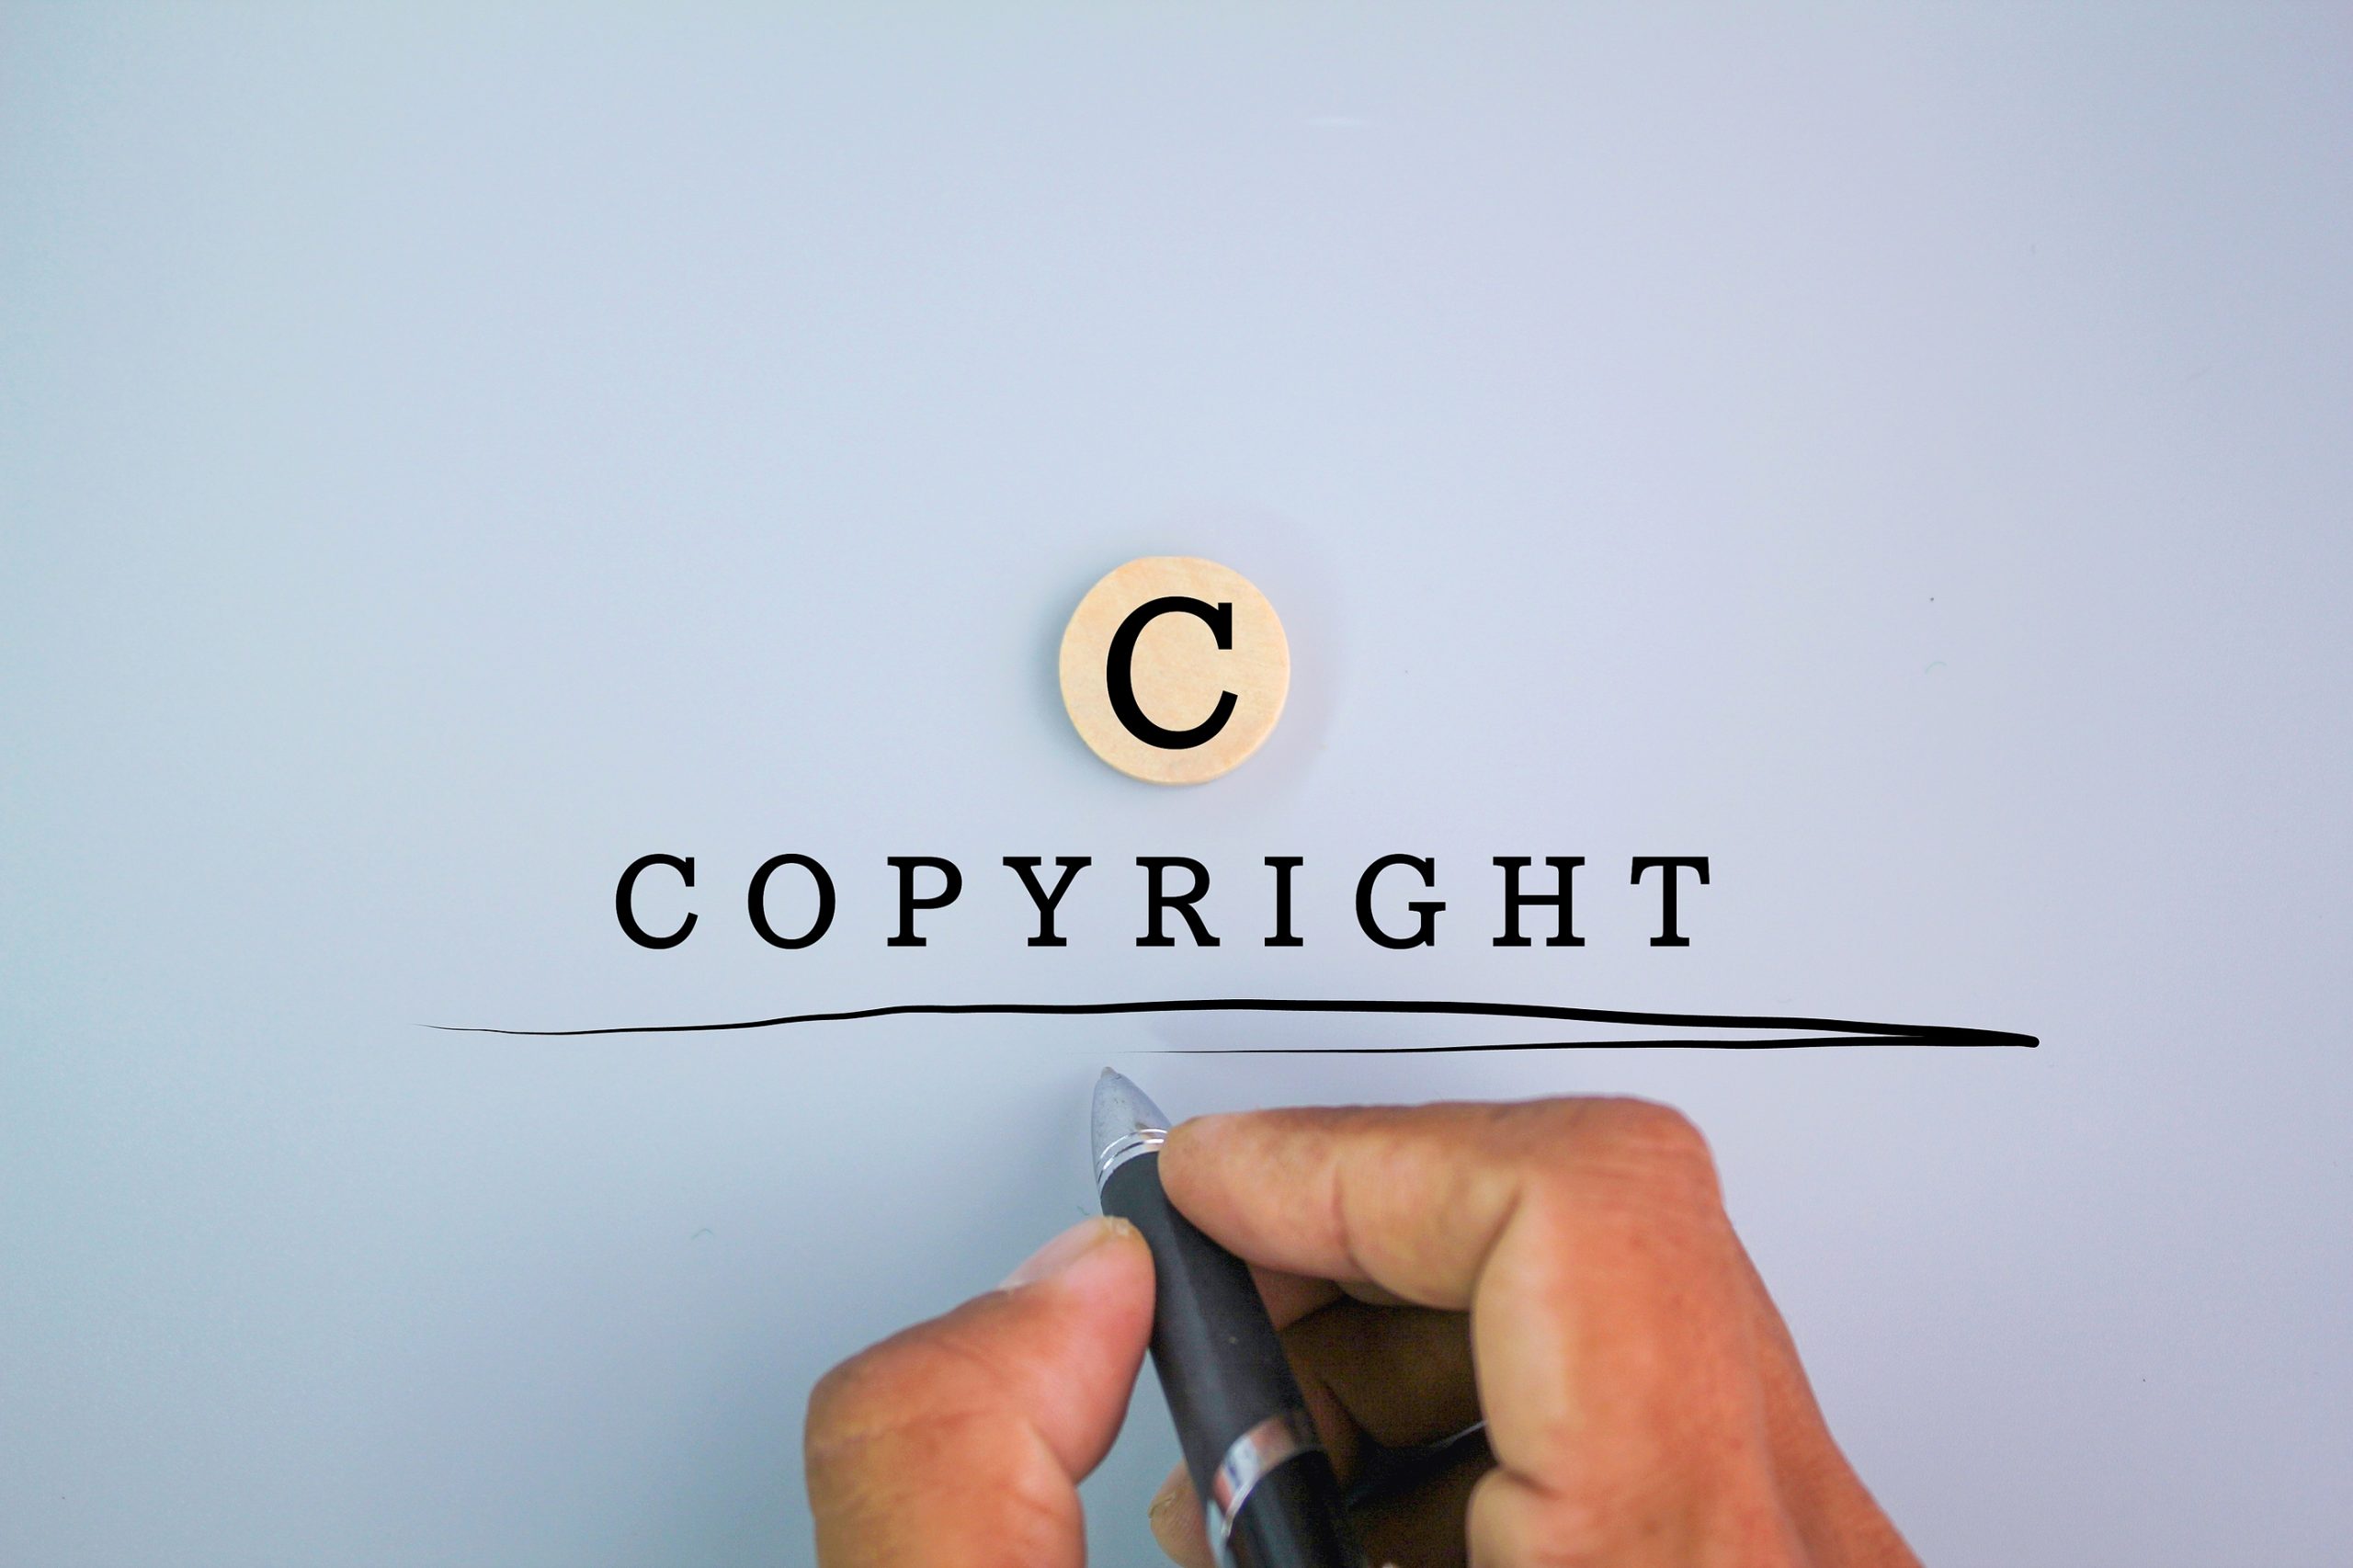 Hand holding a pen and the word copyright with the letter c above.